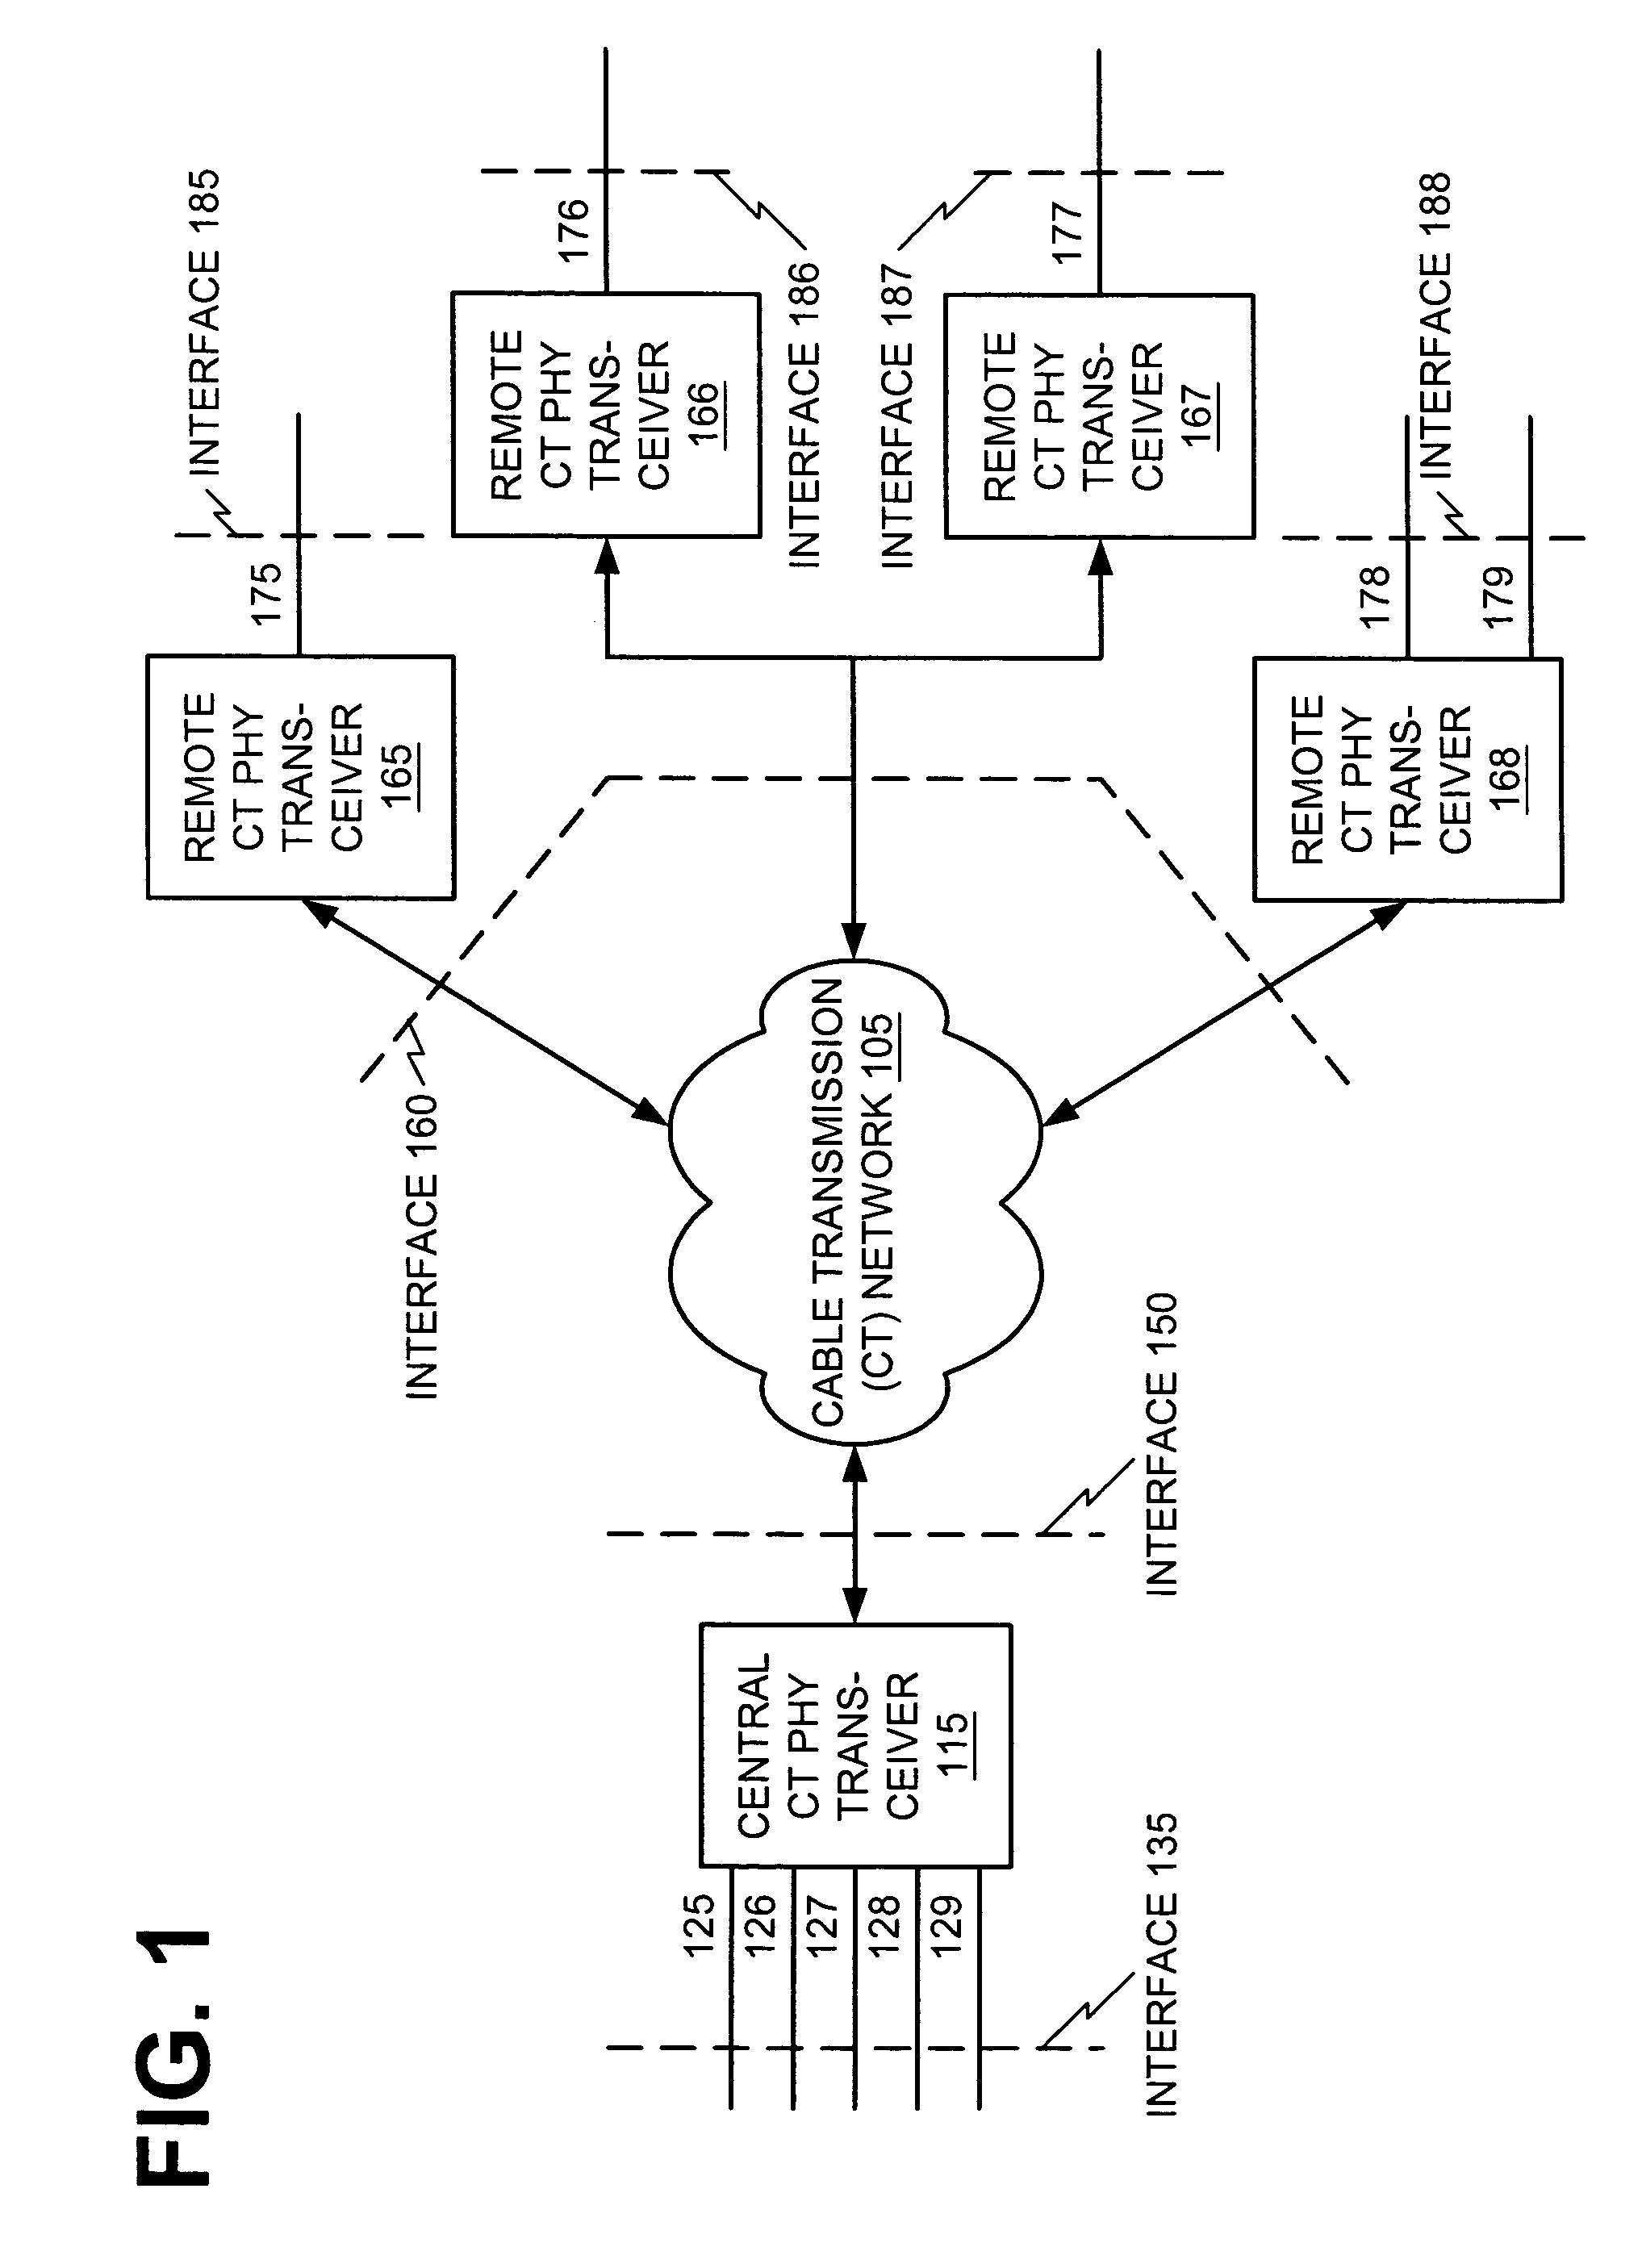 Multiplexing octets from a data flow over MPEG packets